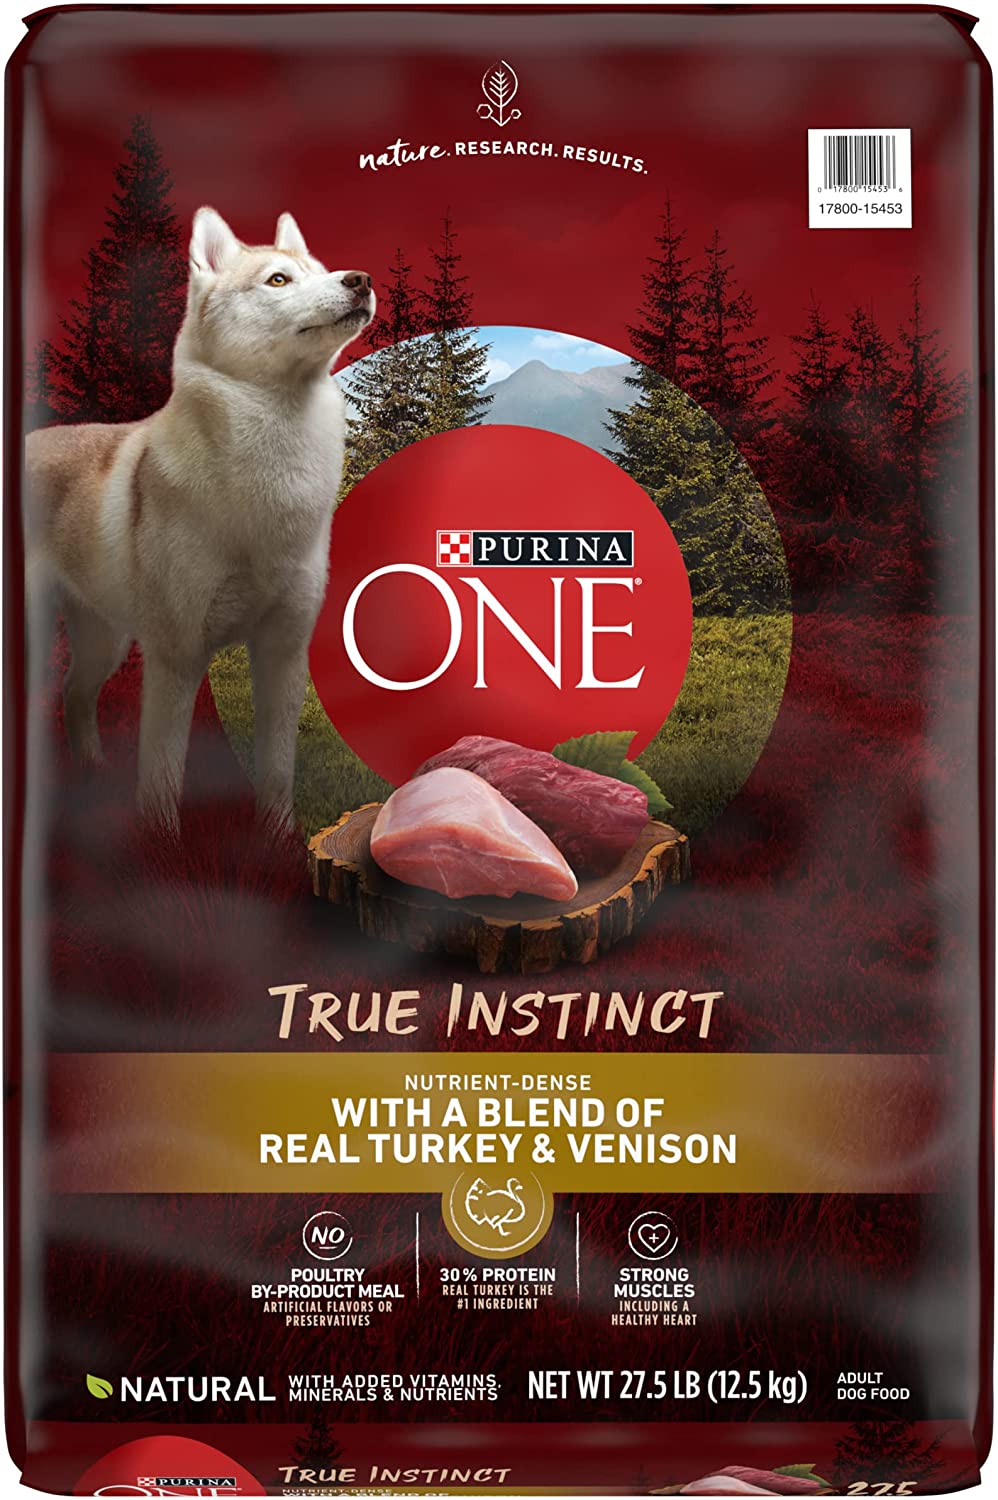 Purina One High Protein Natural Dry Dog Food True Instinct - 12.5 kg